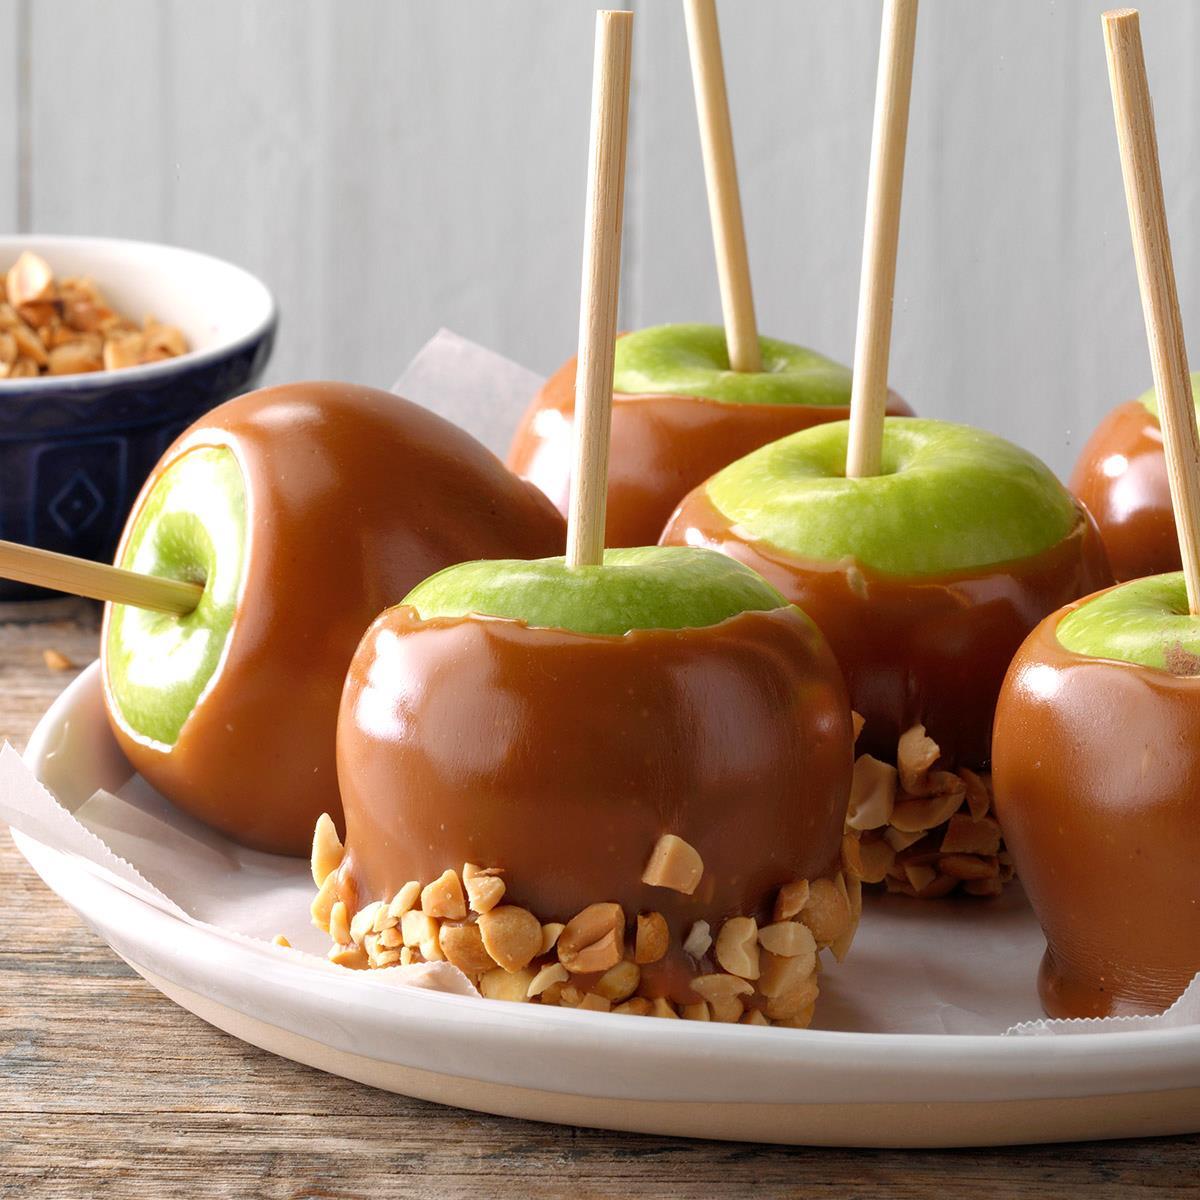 Caramel Apples Recipe: How to Make It